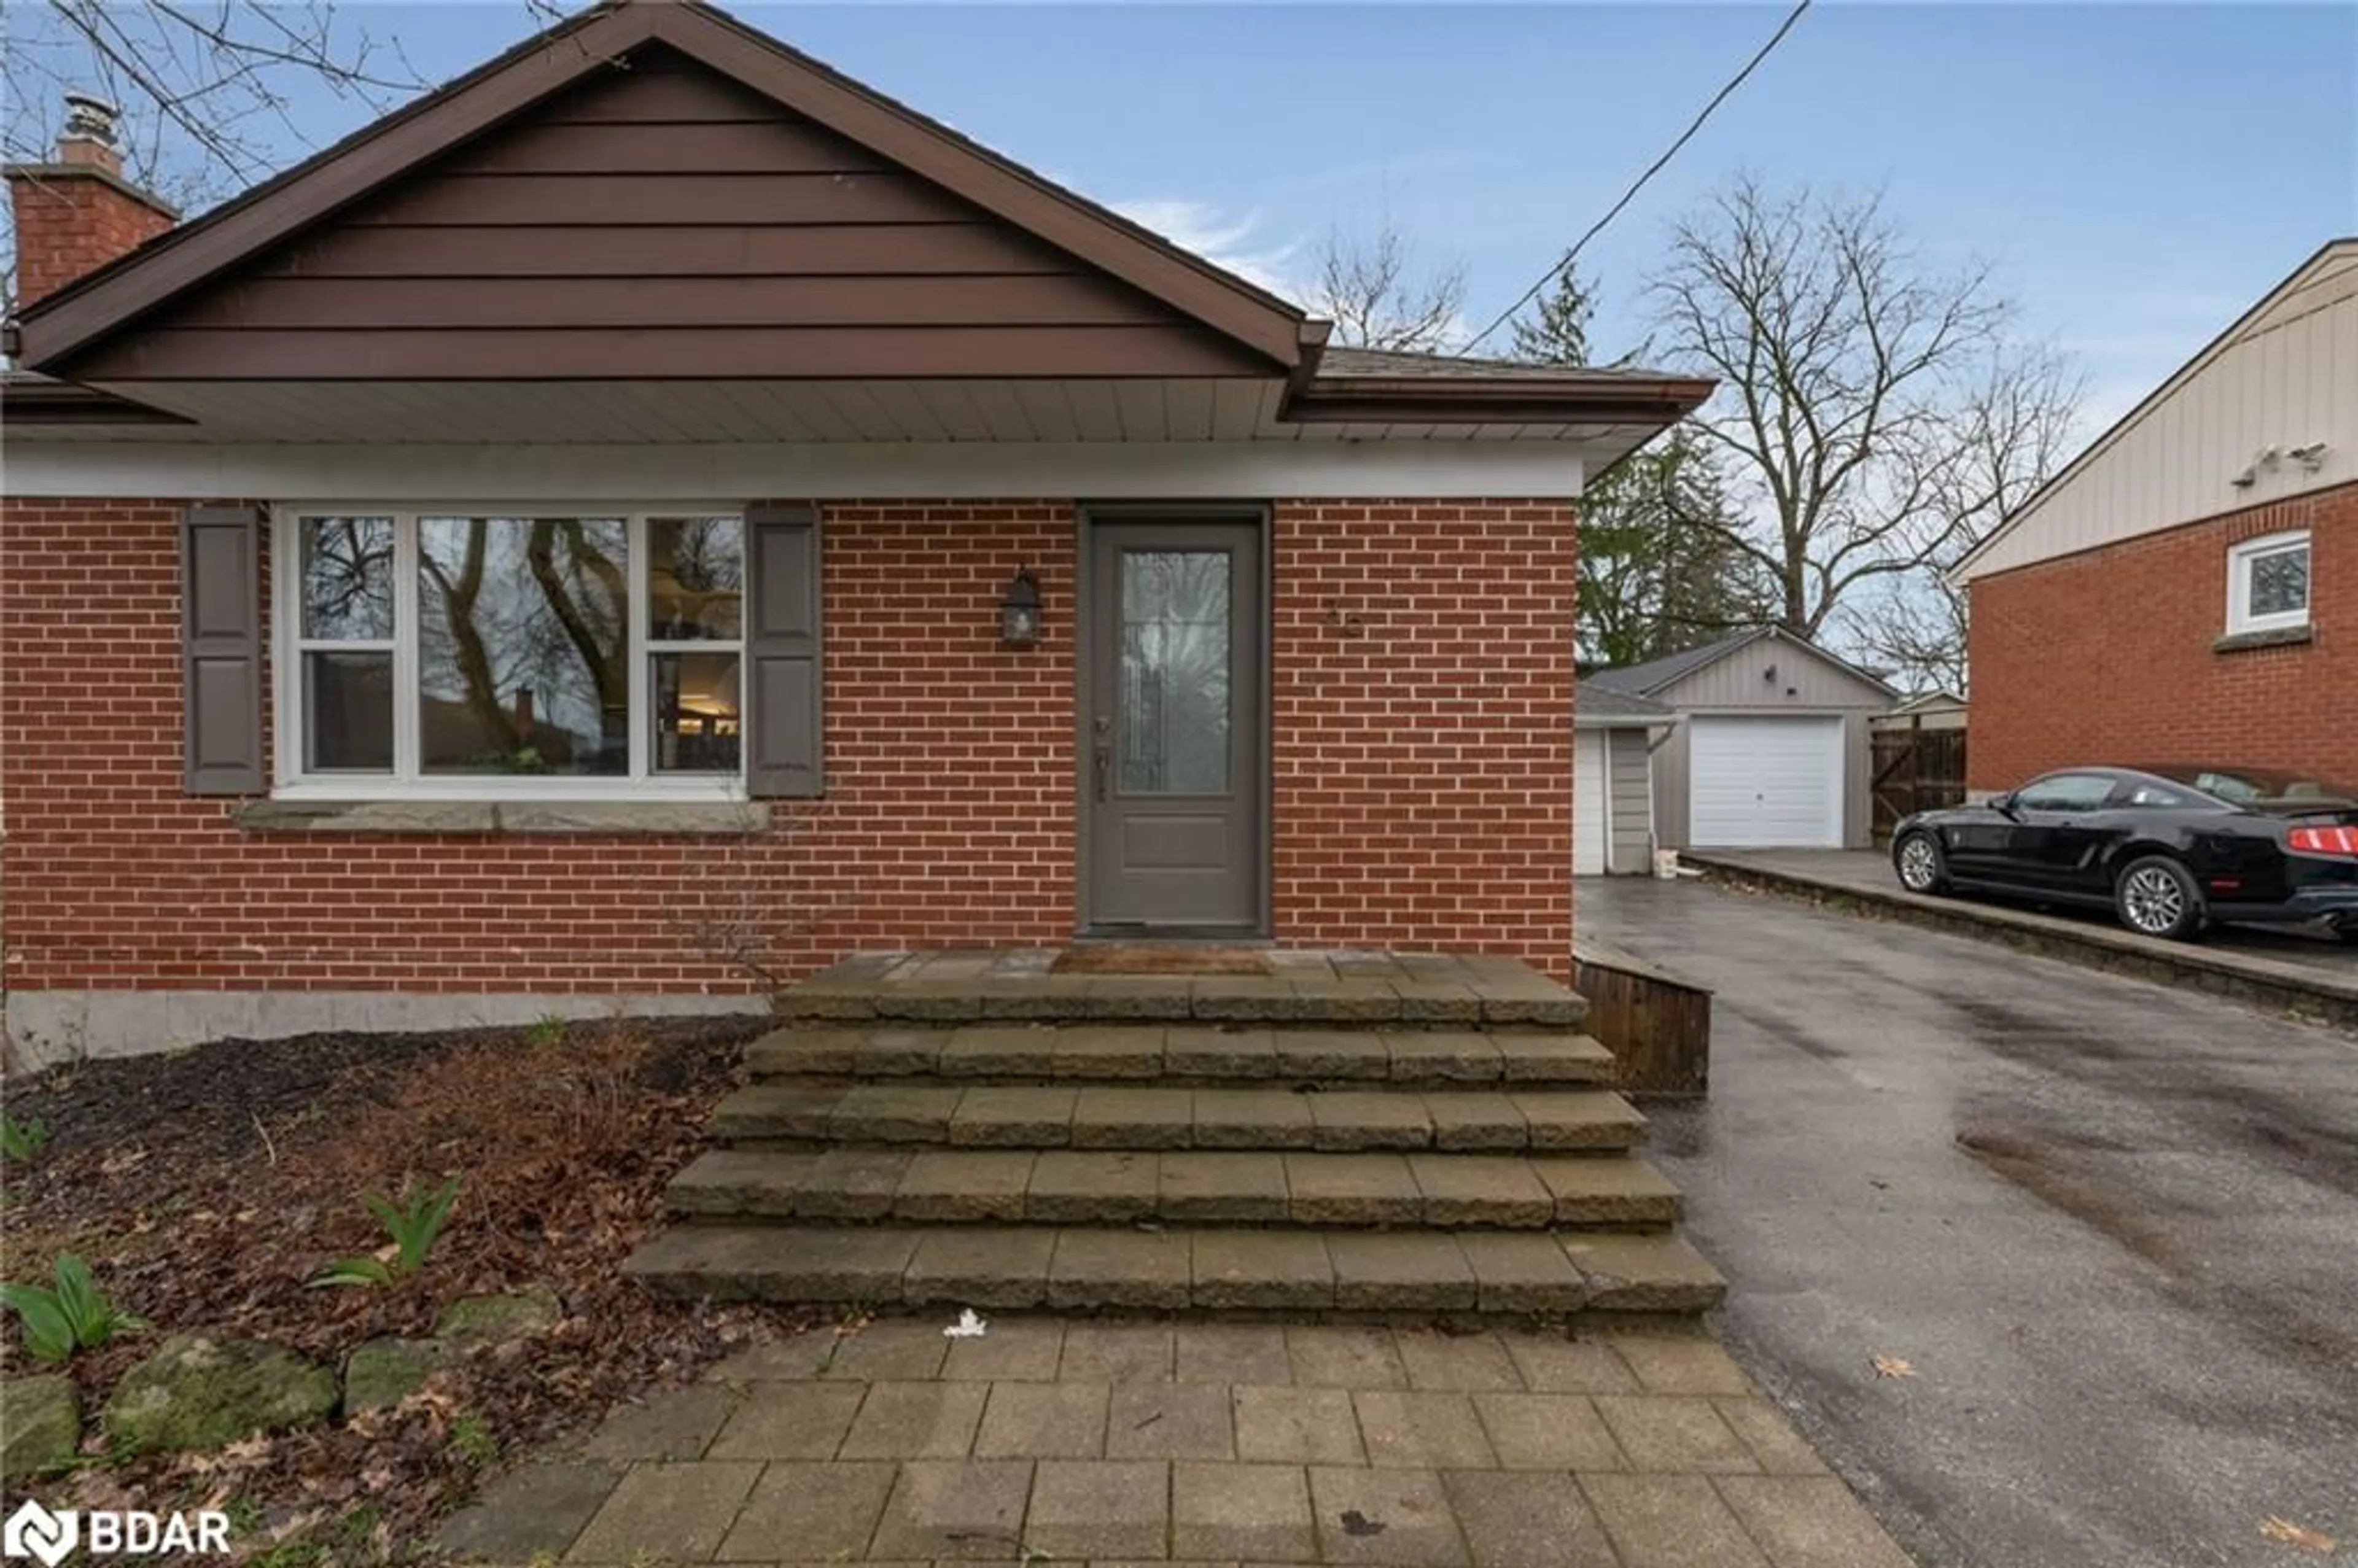 Home with brick exterior material for 36 Lount St, Barrie Ontario L4M 3E1